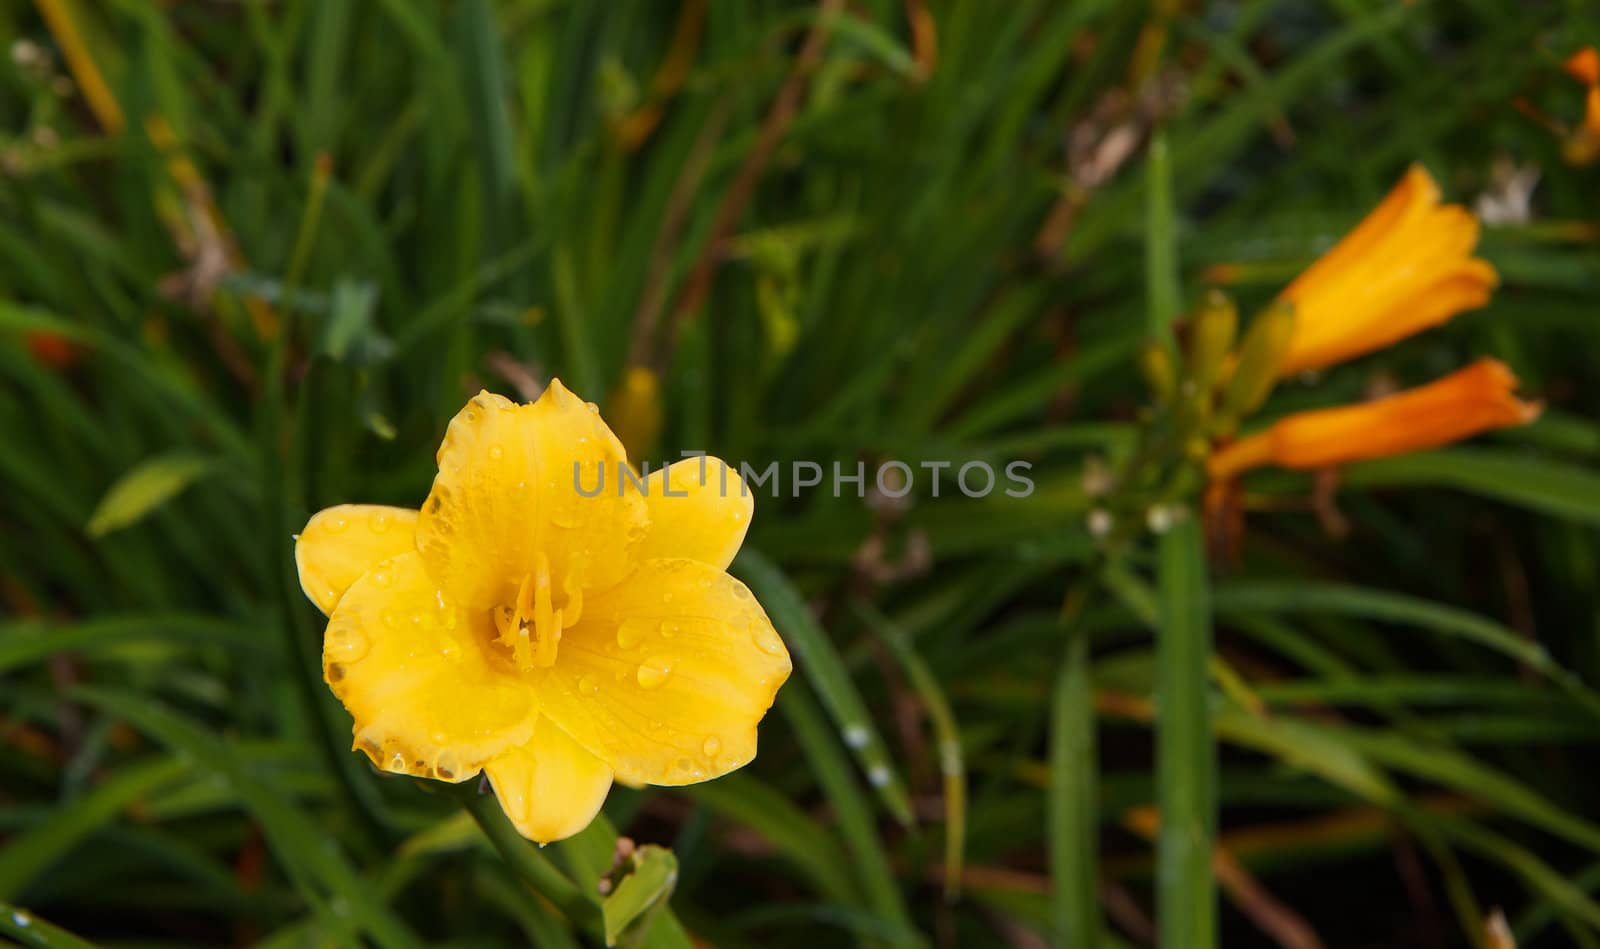 Yellow Day Lilly with background of soft focus green leaves and orange flowers